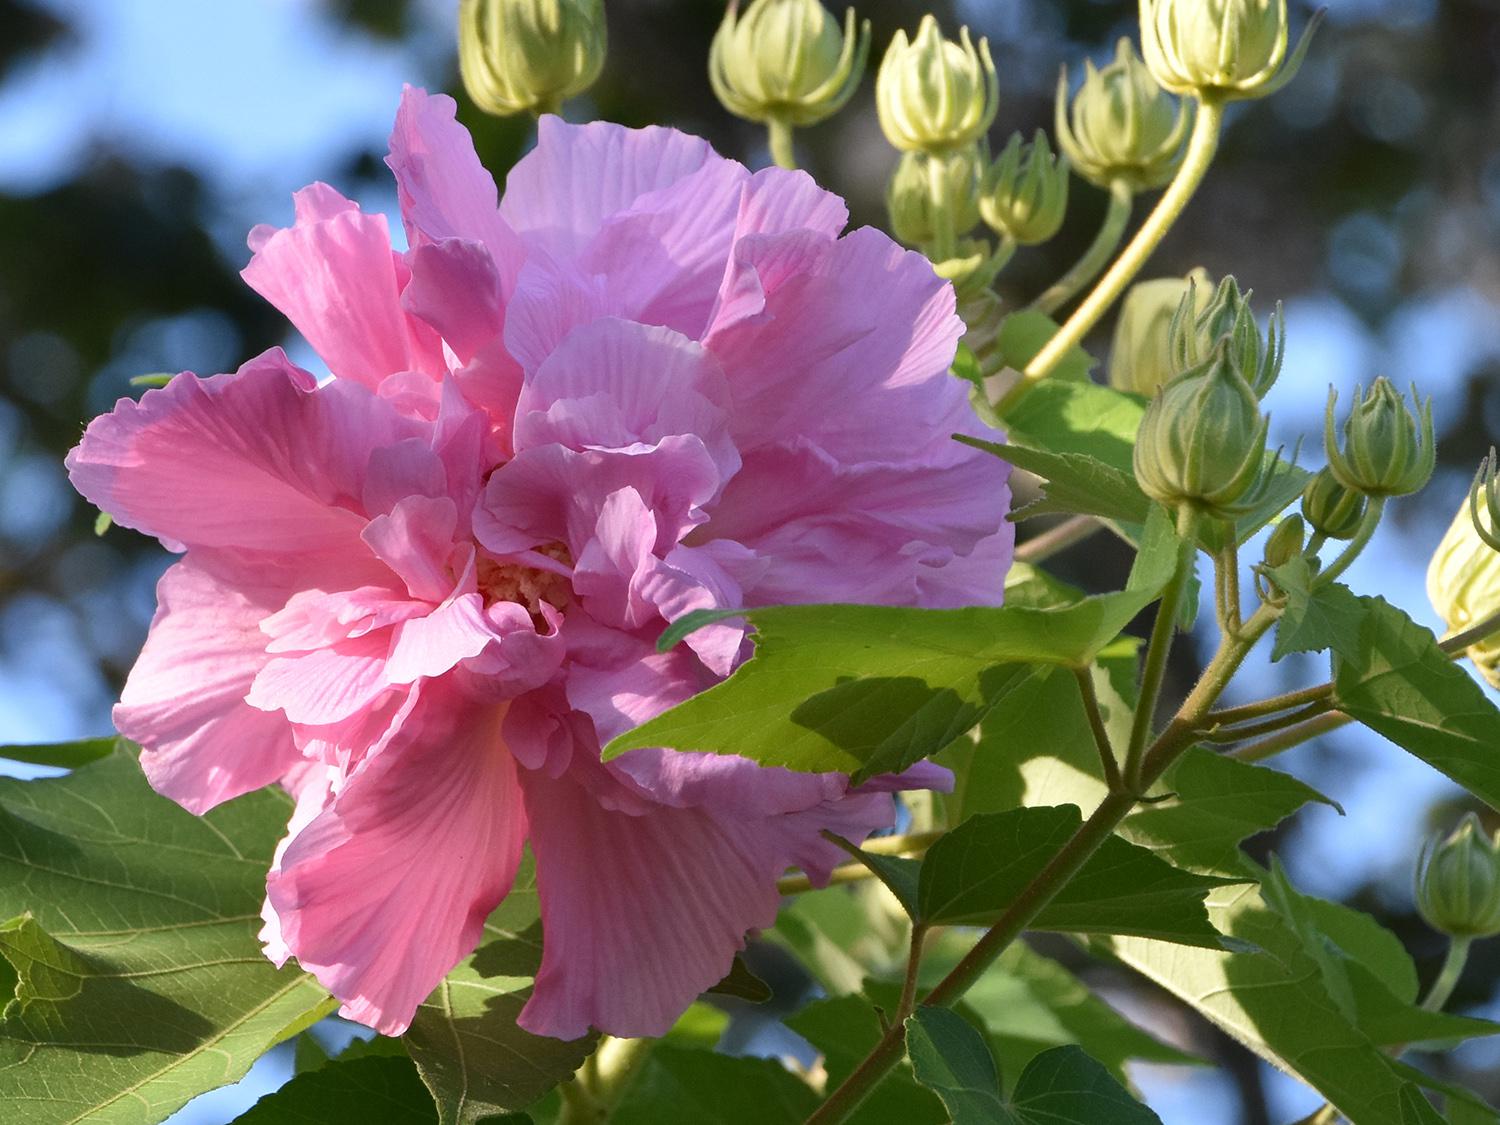 A single, pink flower rests at the end of a branch seen against a leaf-filled blue sky.